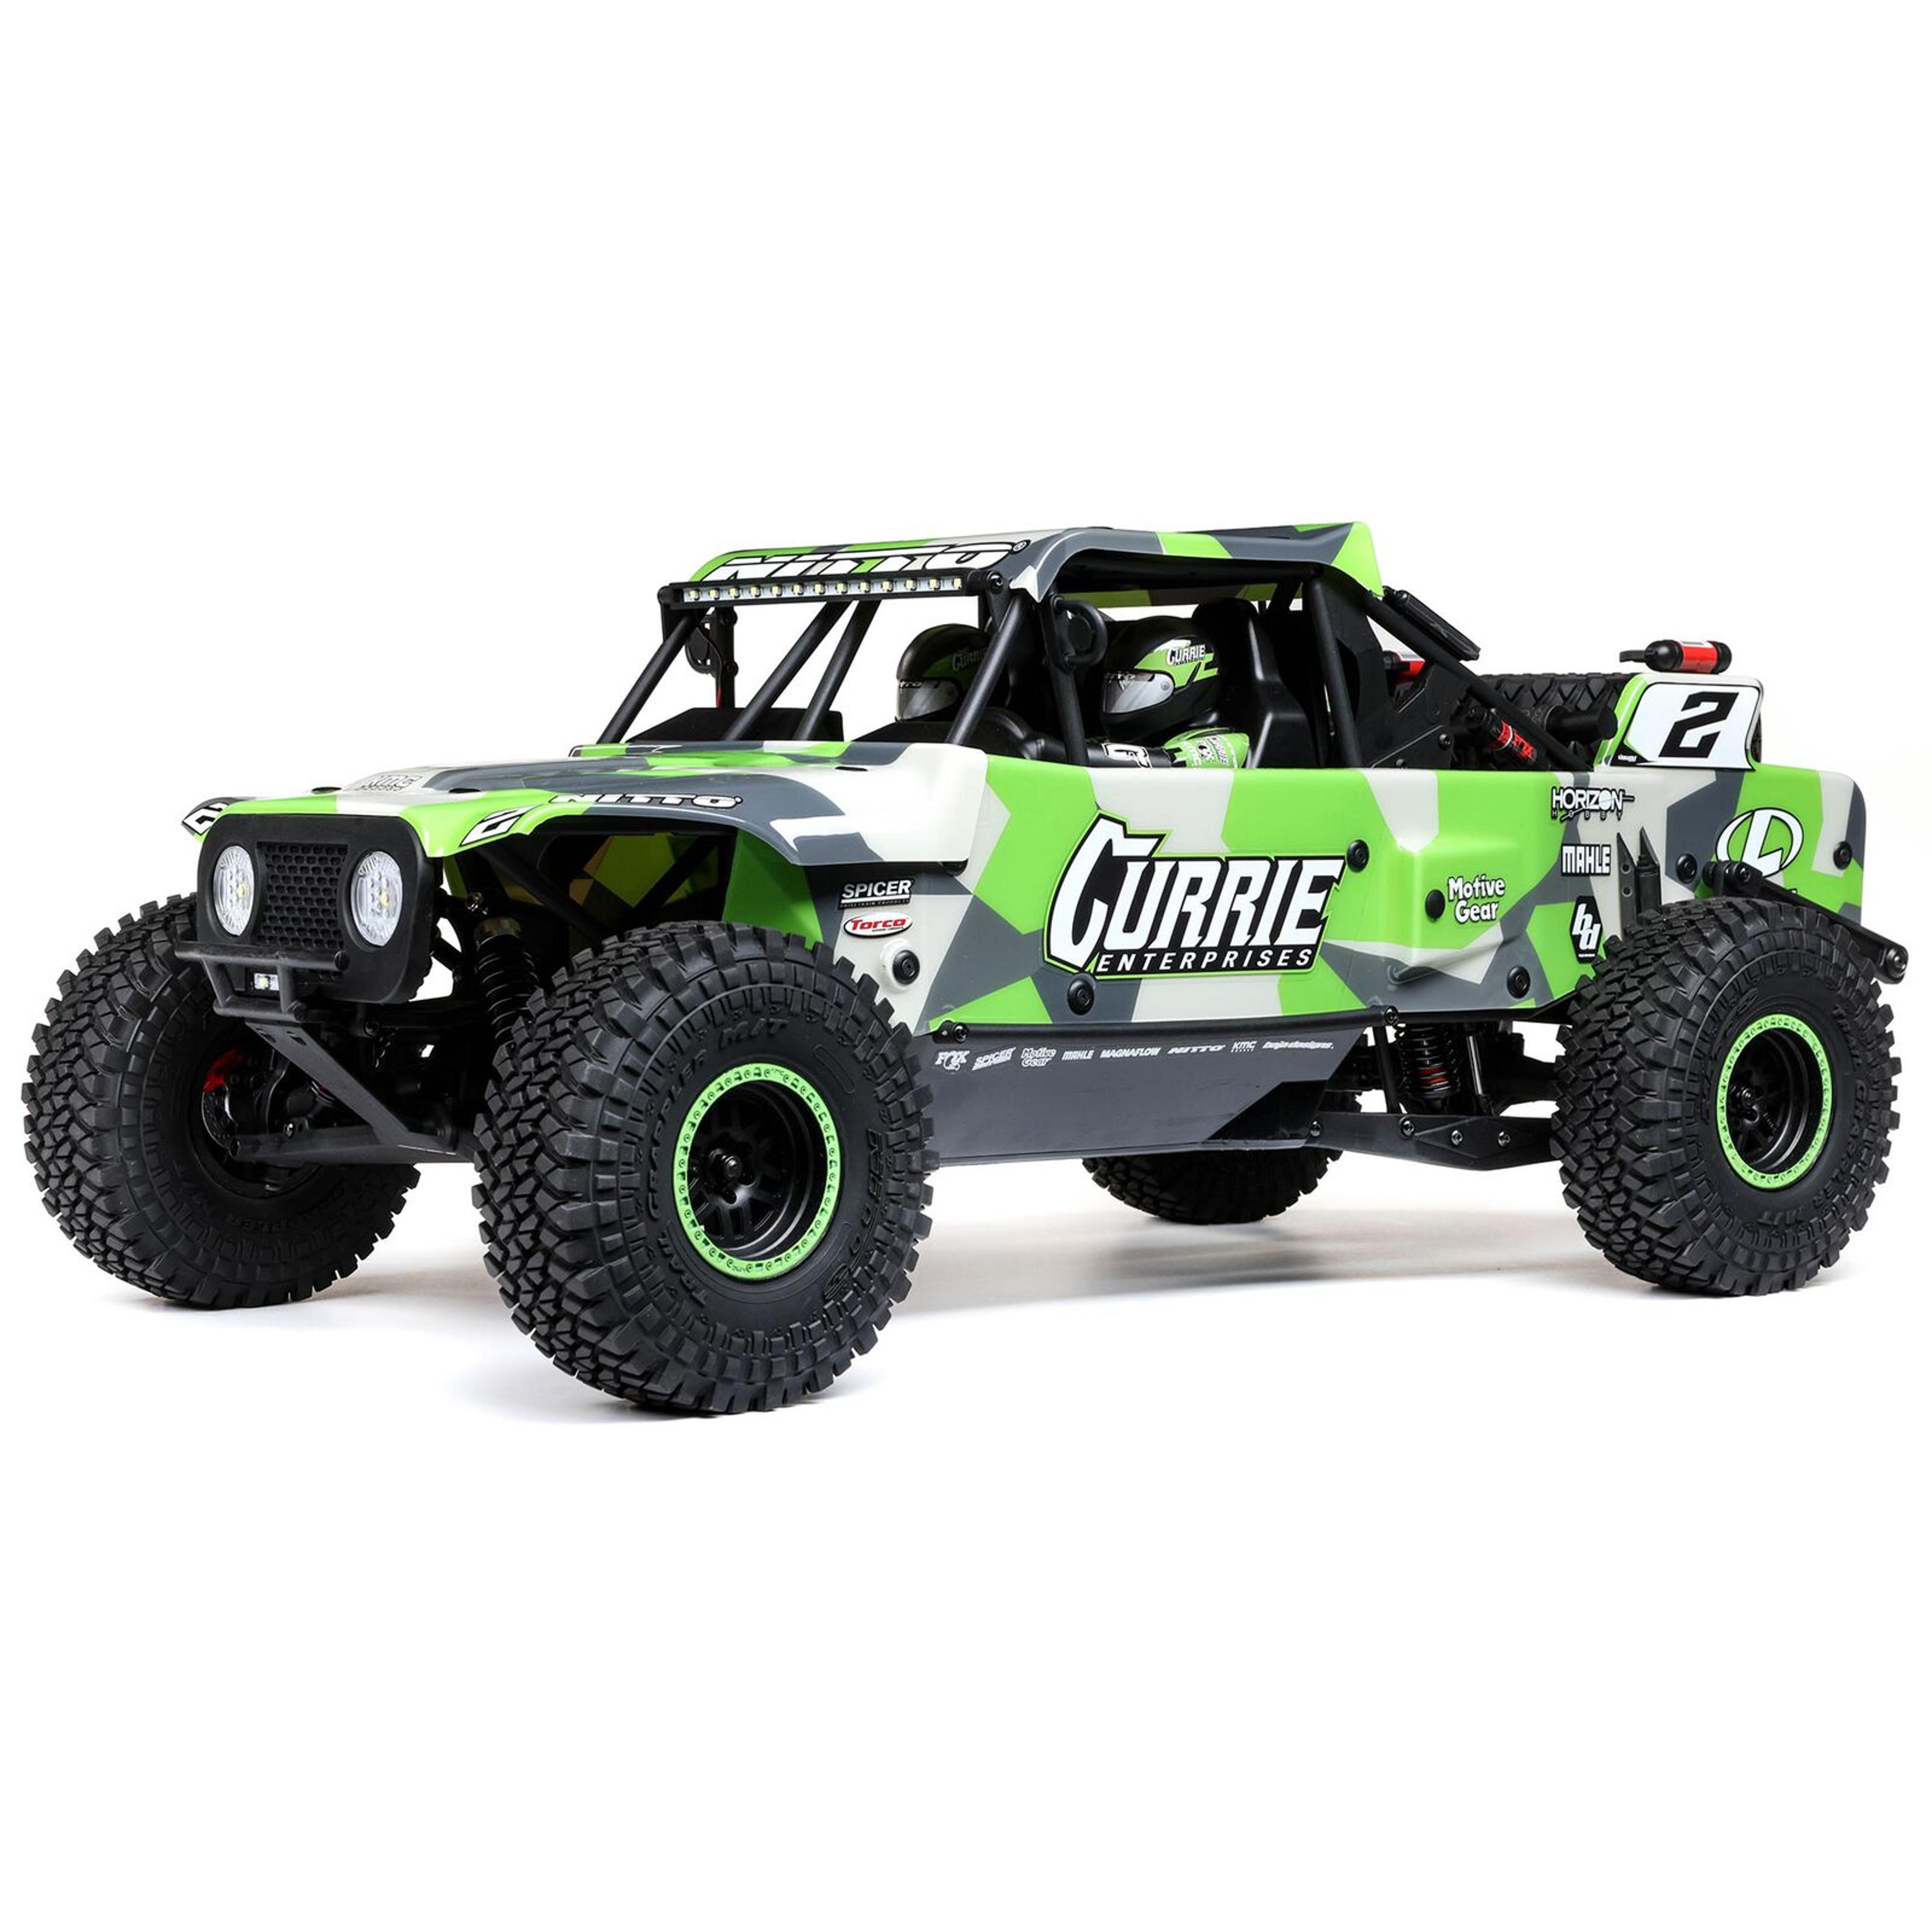 Losi Hammer Rey U4 4WD Rock Racer Brushless RTR w/ Smart and AVC (Green)